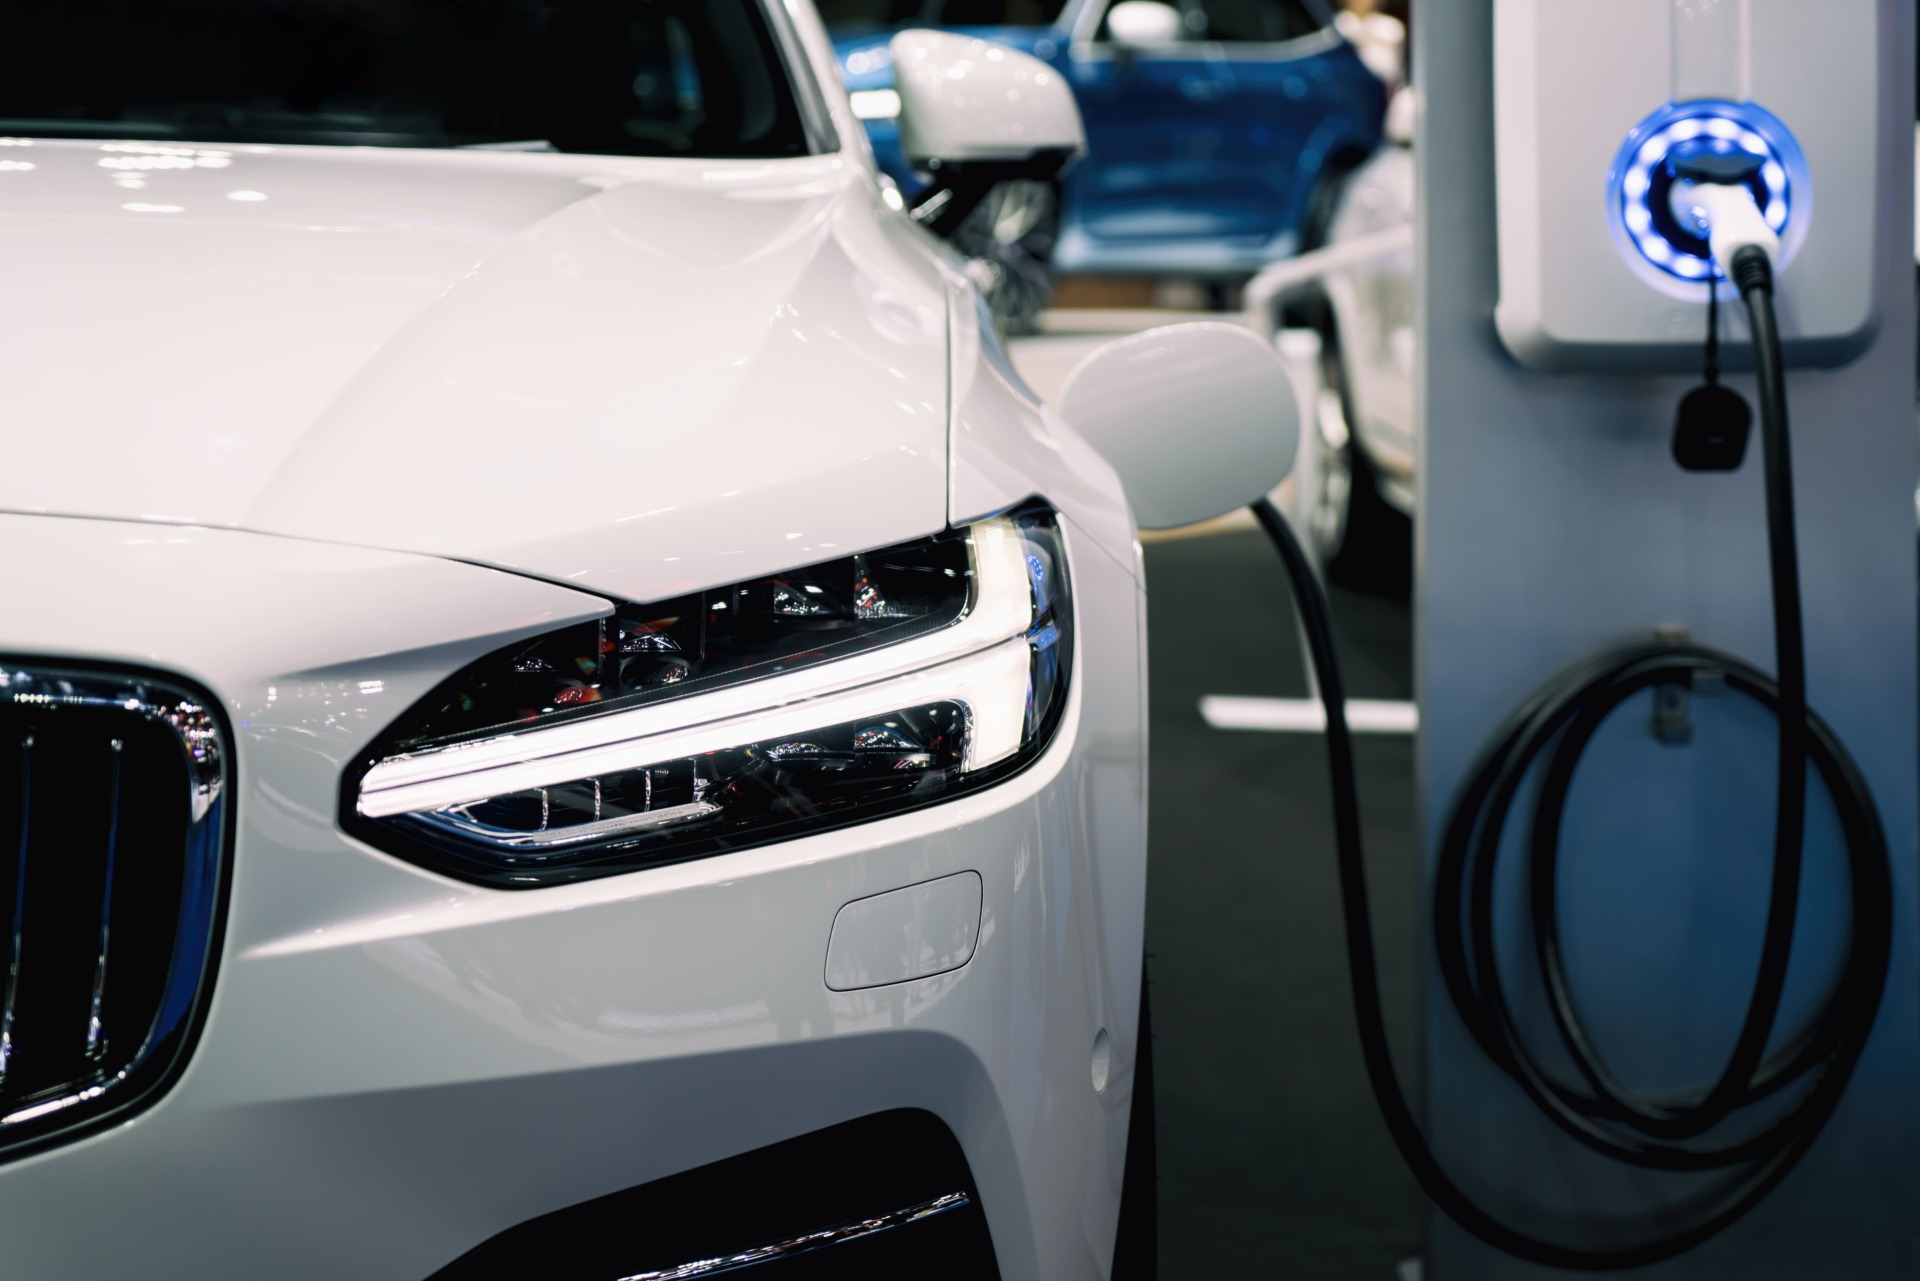 Close-up of a white electric car plugged into a charging station. The front headlight and part of the grille are visible, with the charging cable connected to the car. In the background, other cars are blurred. The scene depicts a modern electric vehicle charging setup.